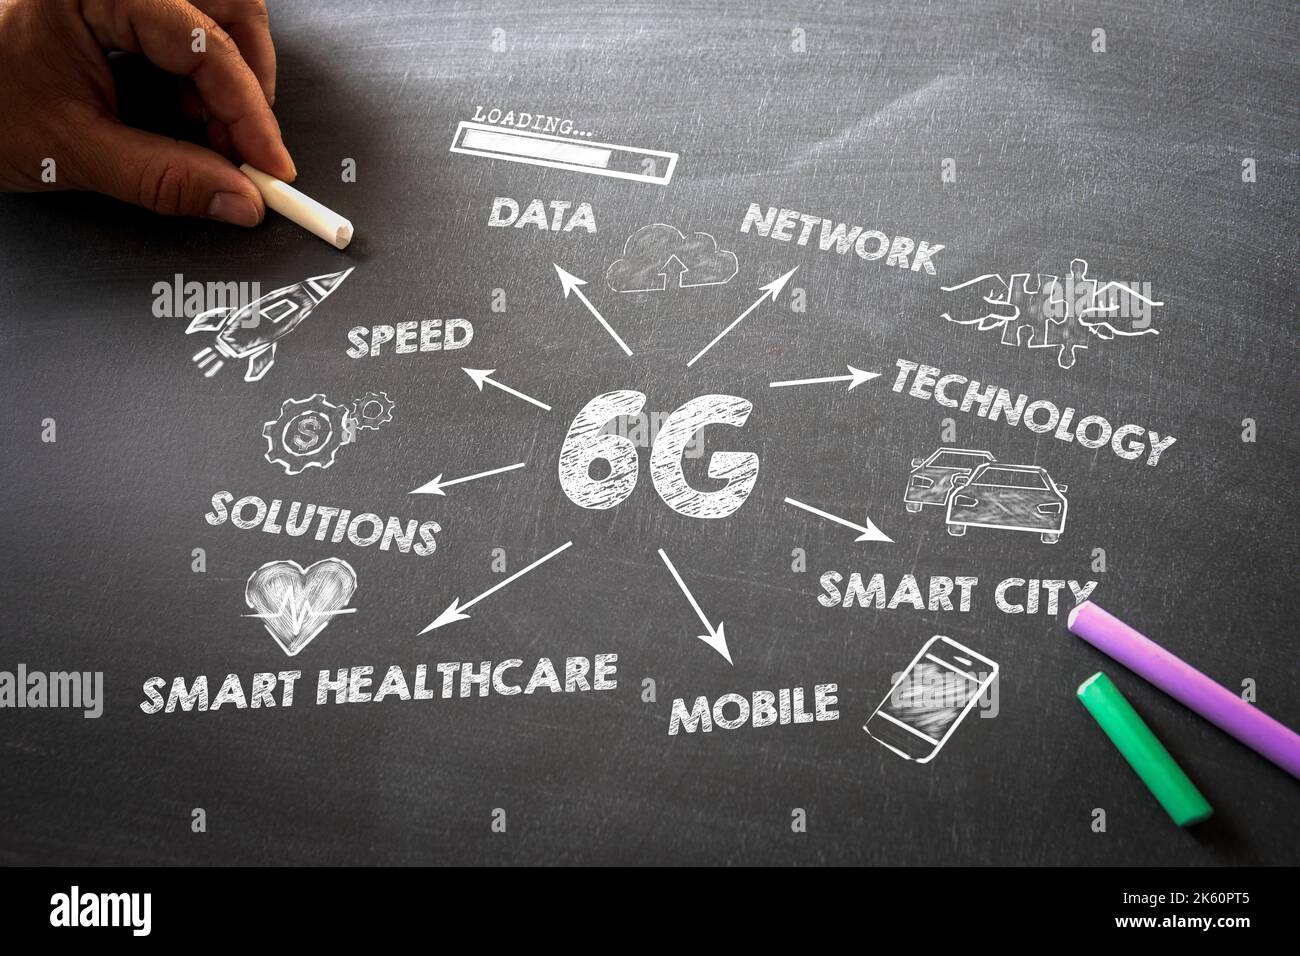 6g tehnology concept. Chart with keywords and icons. Chalk board background. Stock Photo